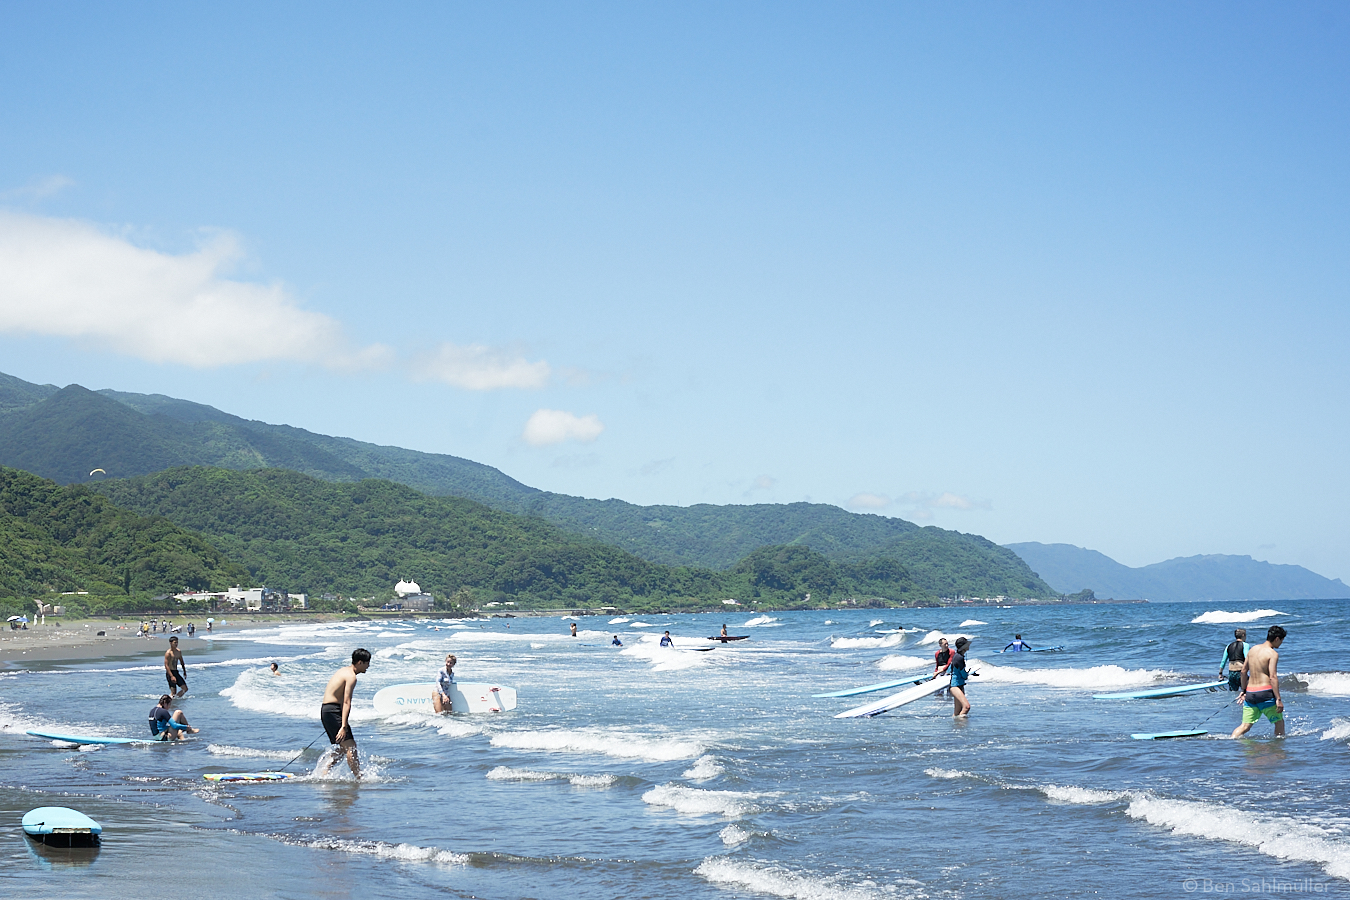 A beach, seen from the water's edge. There are many people tucking their surfboards into the waves. The weather is great with a clear blue sky.